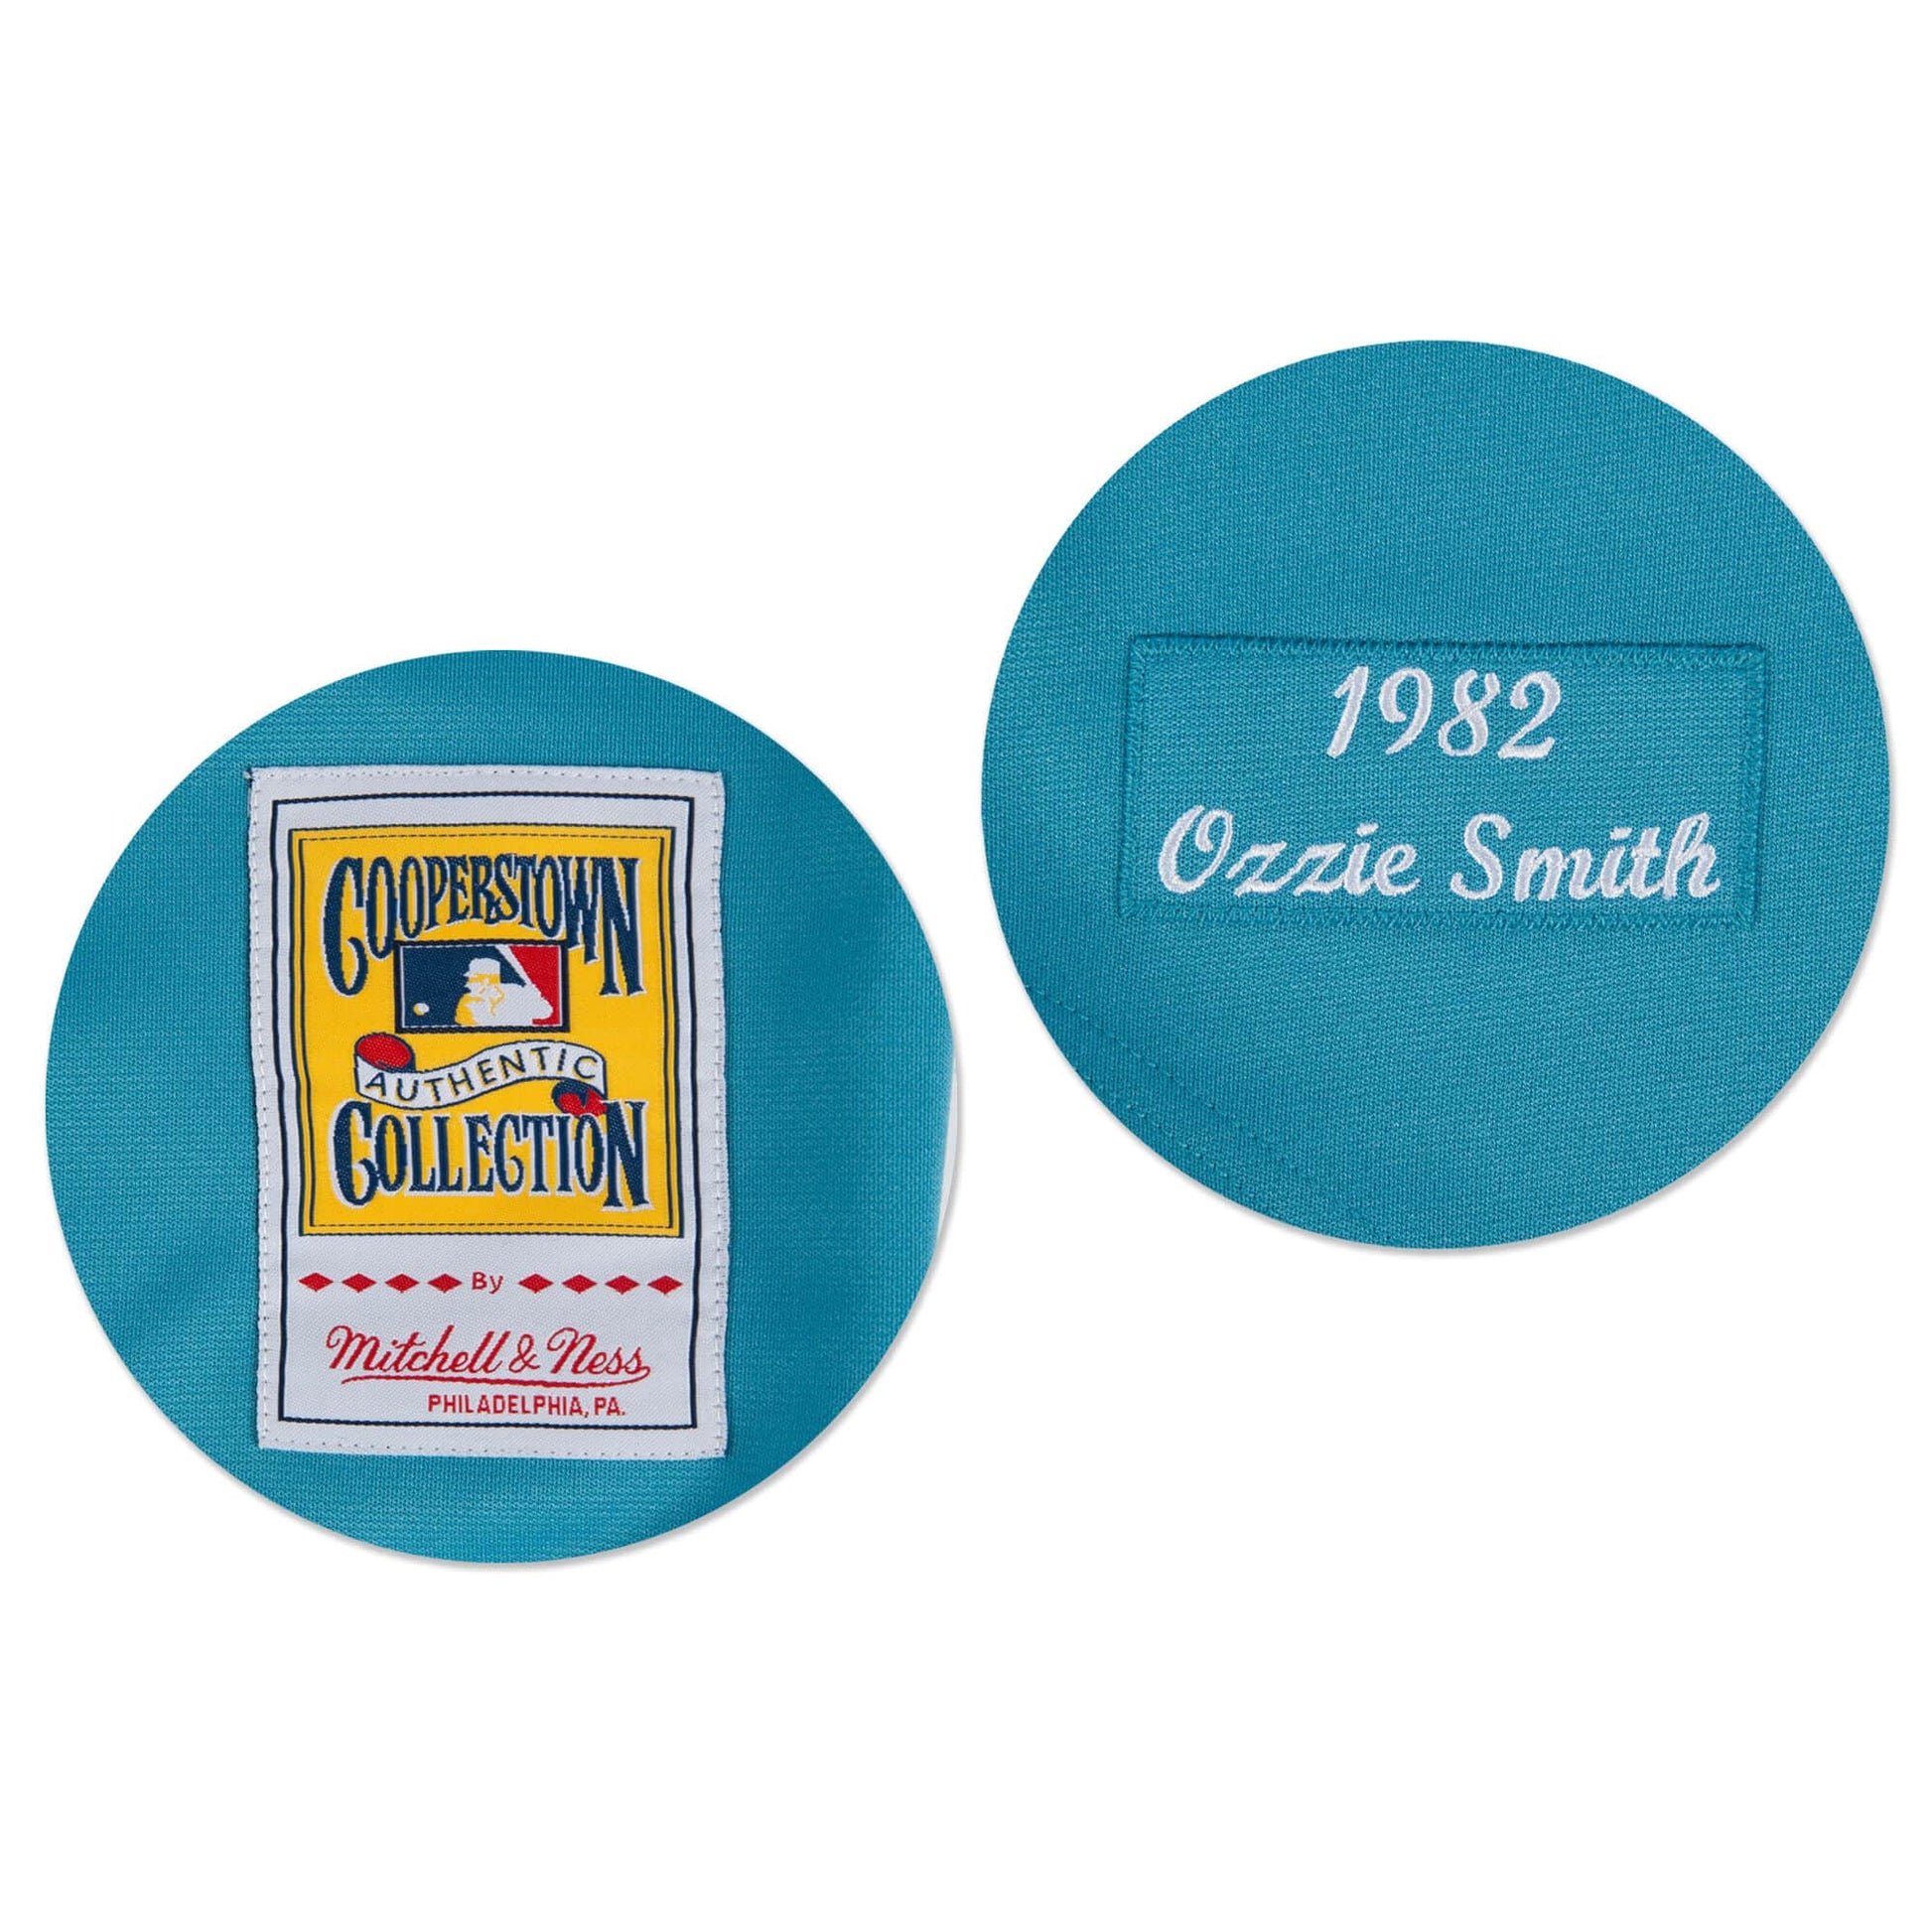 MLB Authentic Jersey St. Louis Cardinals 1982 Ozzie Smith #1